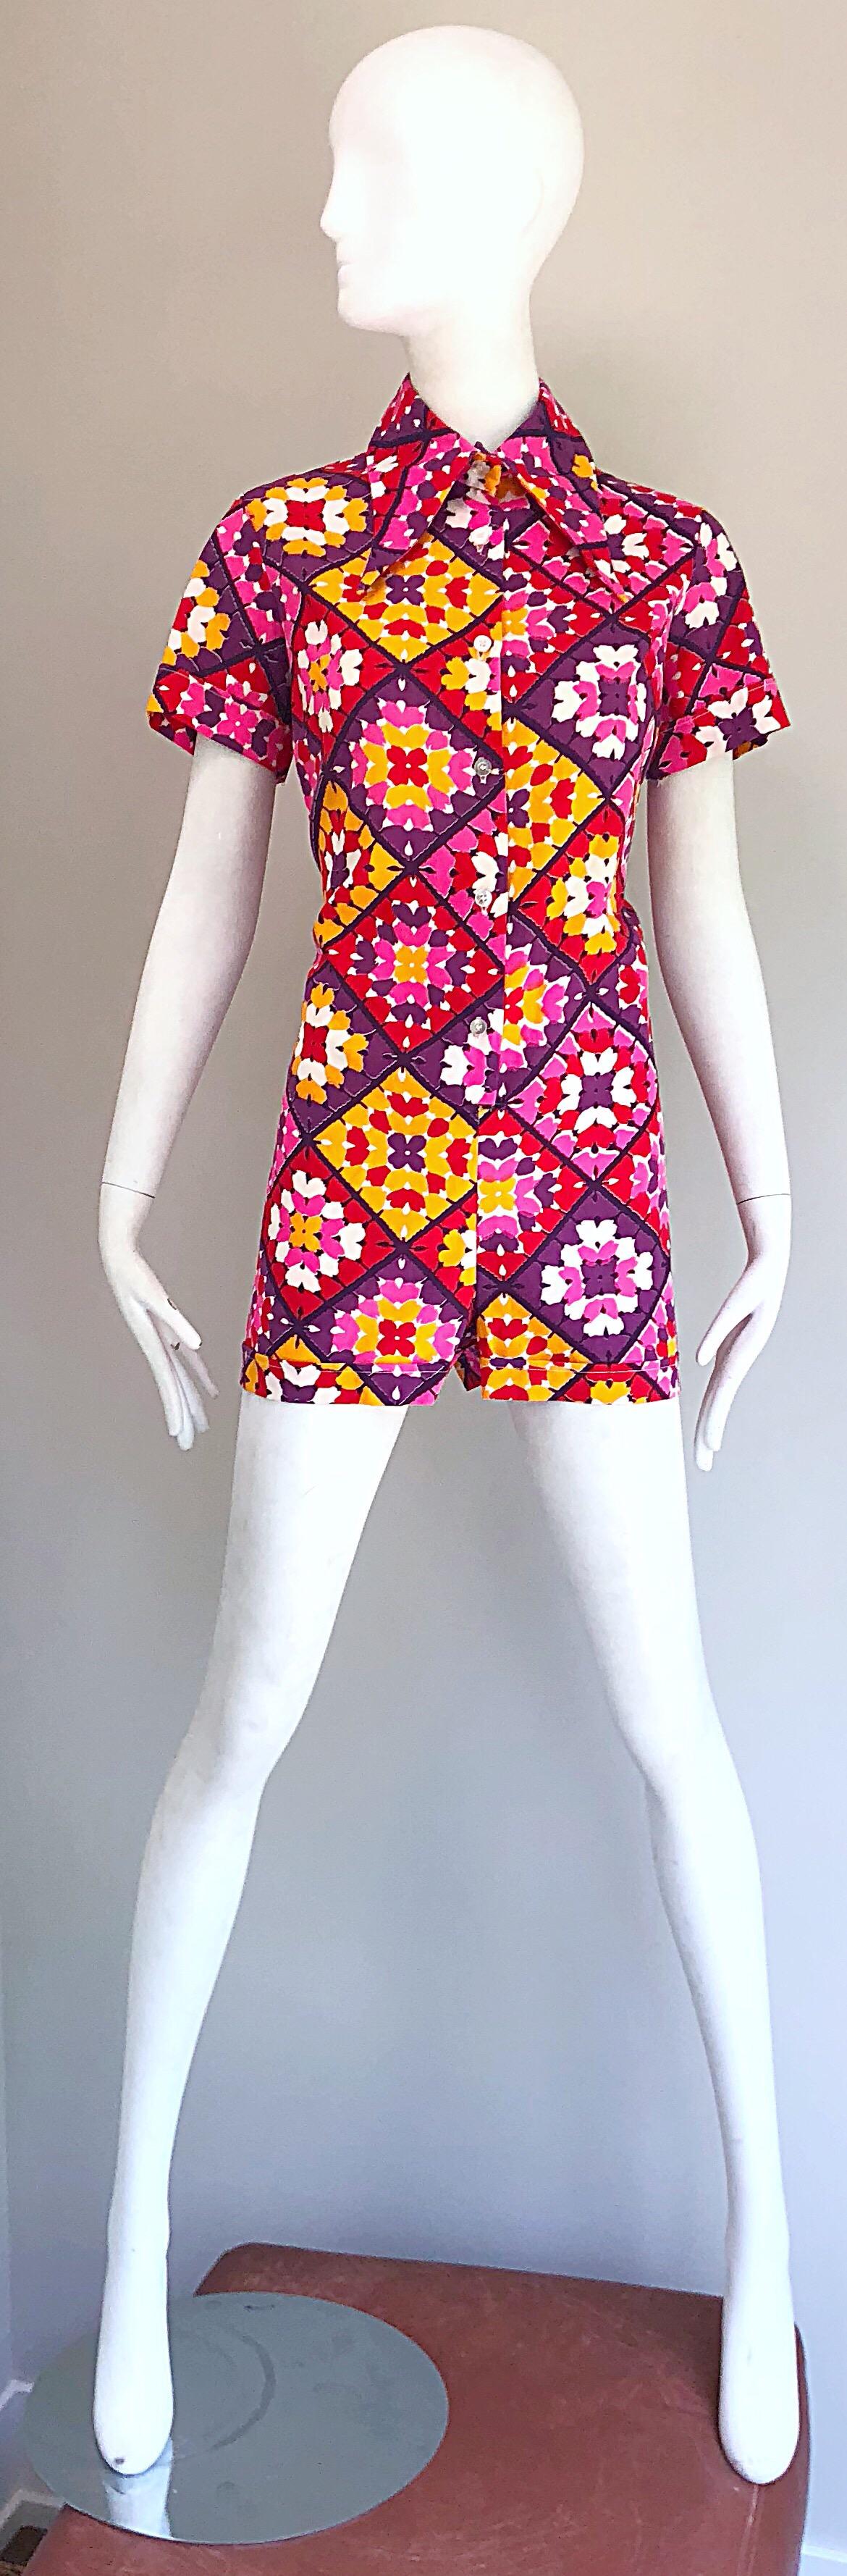 Amazing 1970s new with tags ( deadstock ) kaleidoscope hearts and flowers print one piece hot pants romper / jumpsuit! Features a symmetrical kaleidoscope print in vibrant colors of hot pink, fuchsia, purple, marigold yellow, and red. Buttons up the